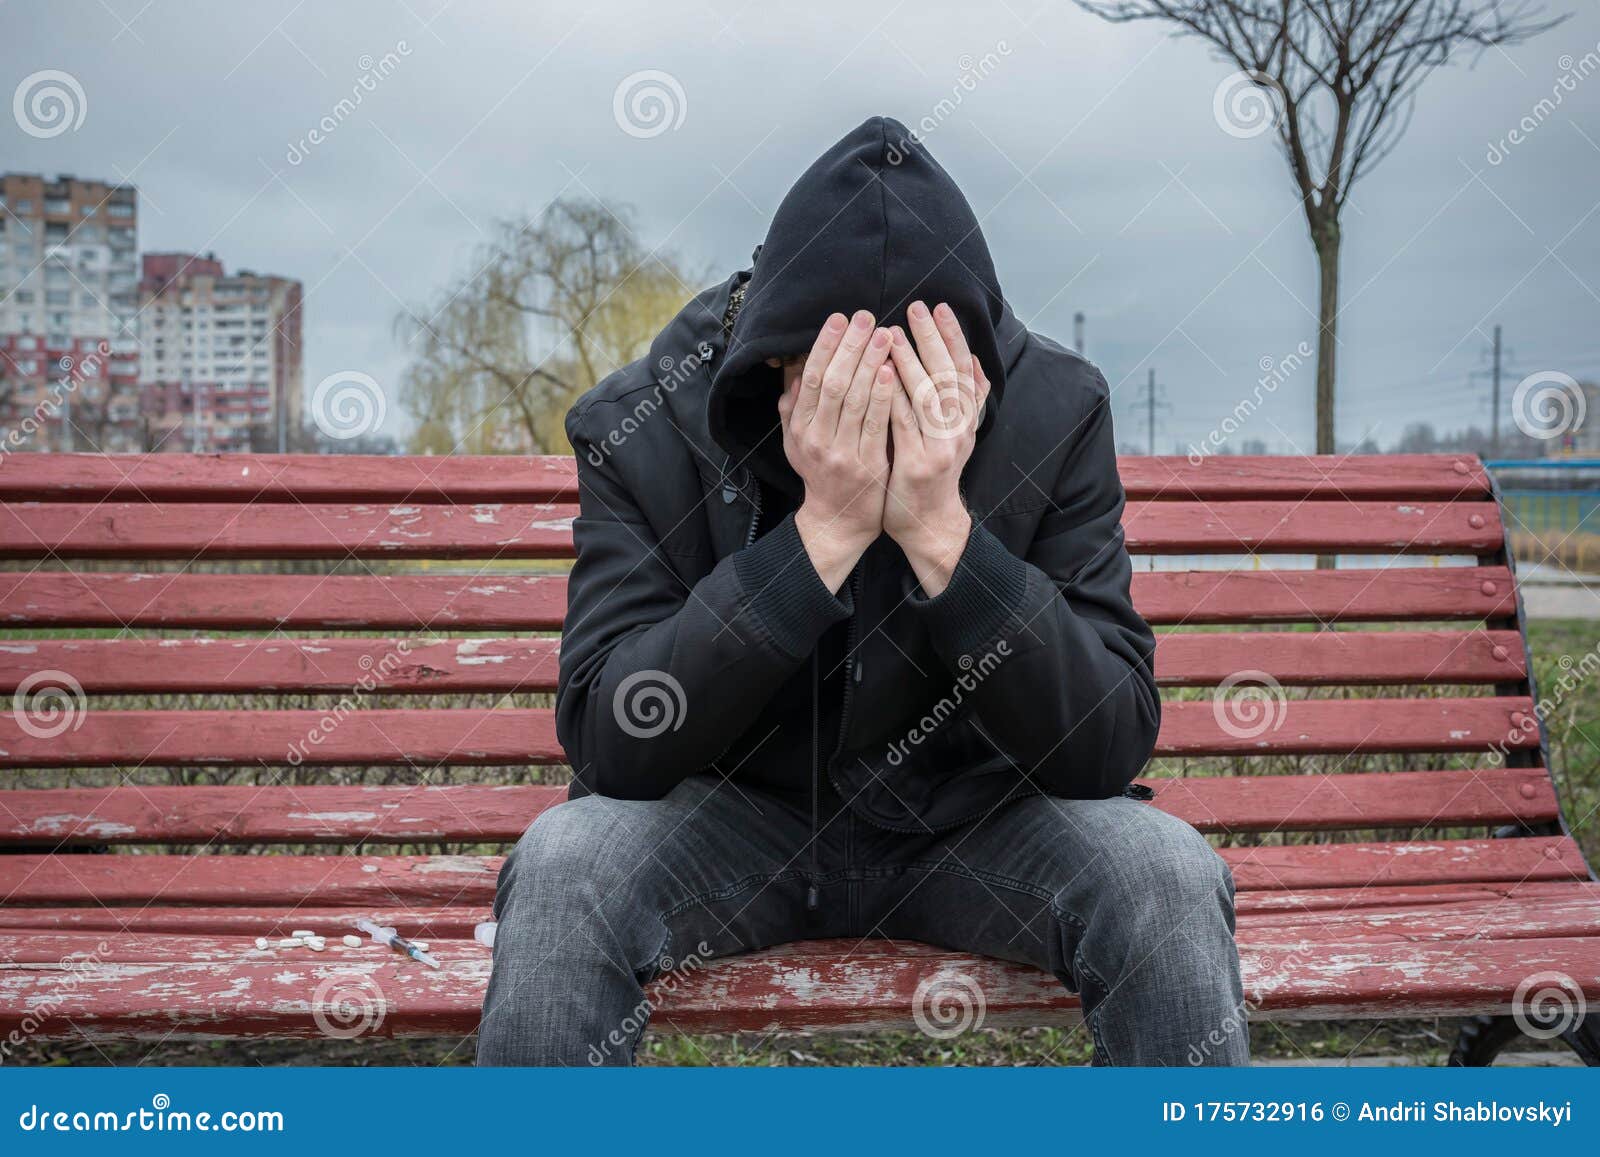 The Addict Sits Alone and Depressed on the Street, Covering His Face ...